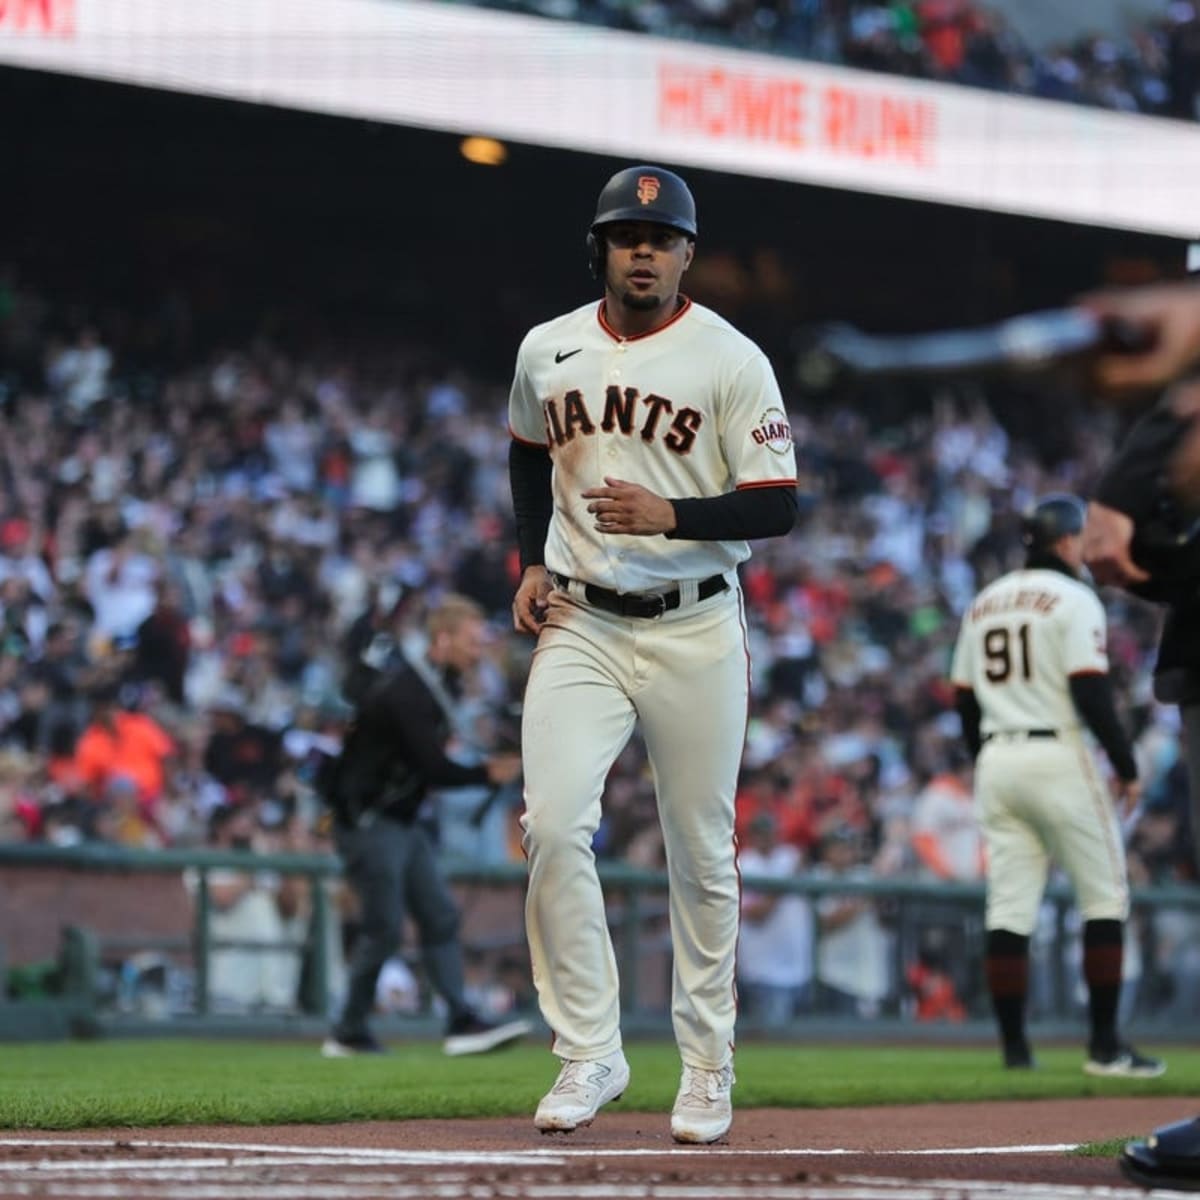 How to Watch San Francisco Giants vs